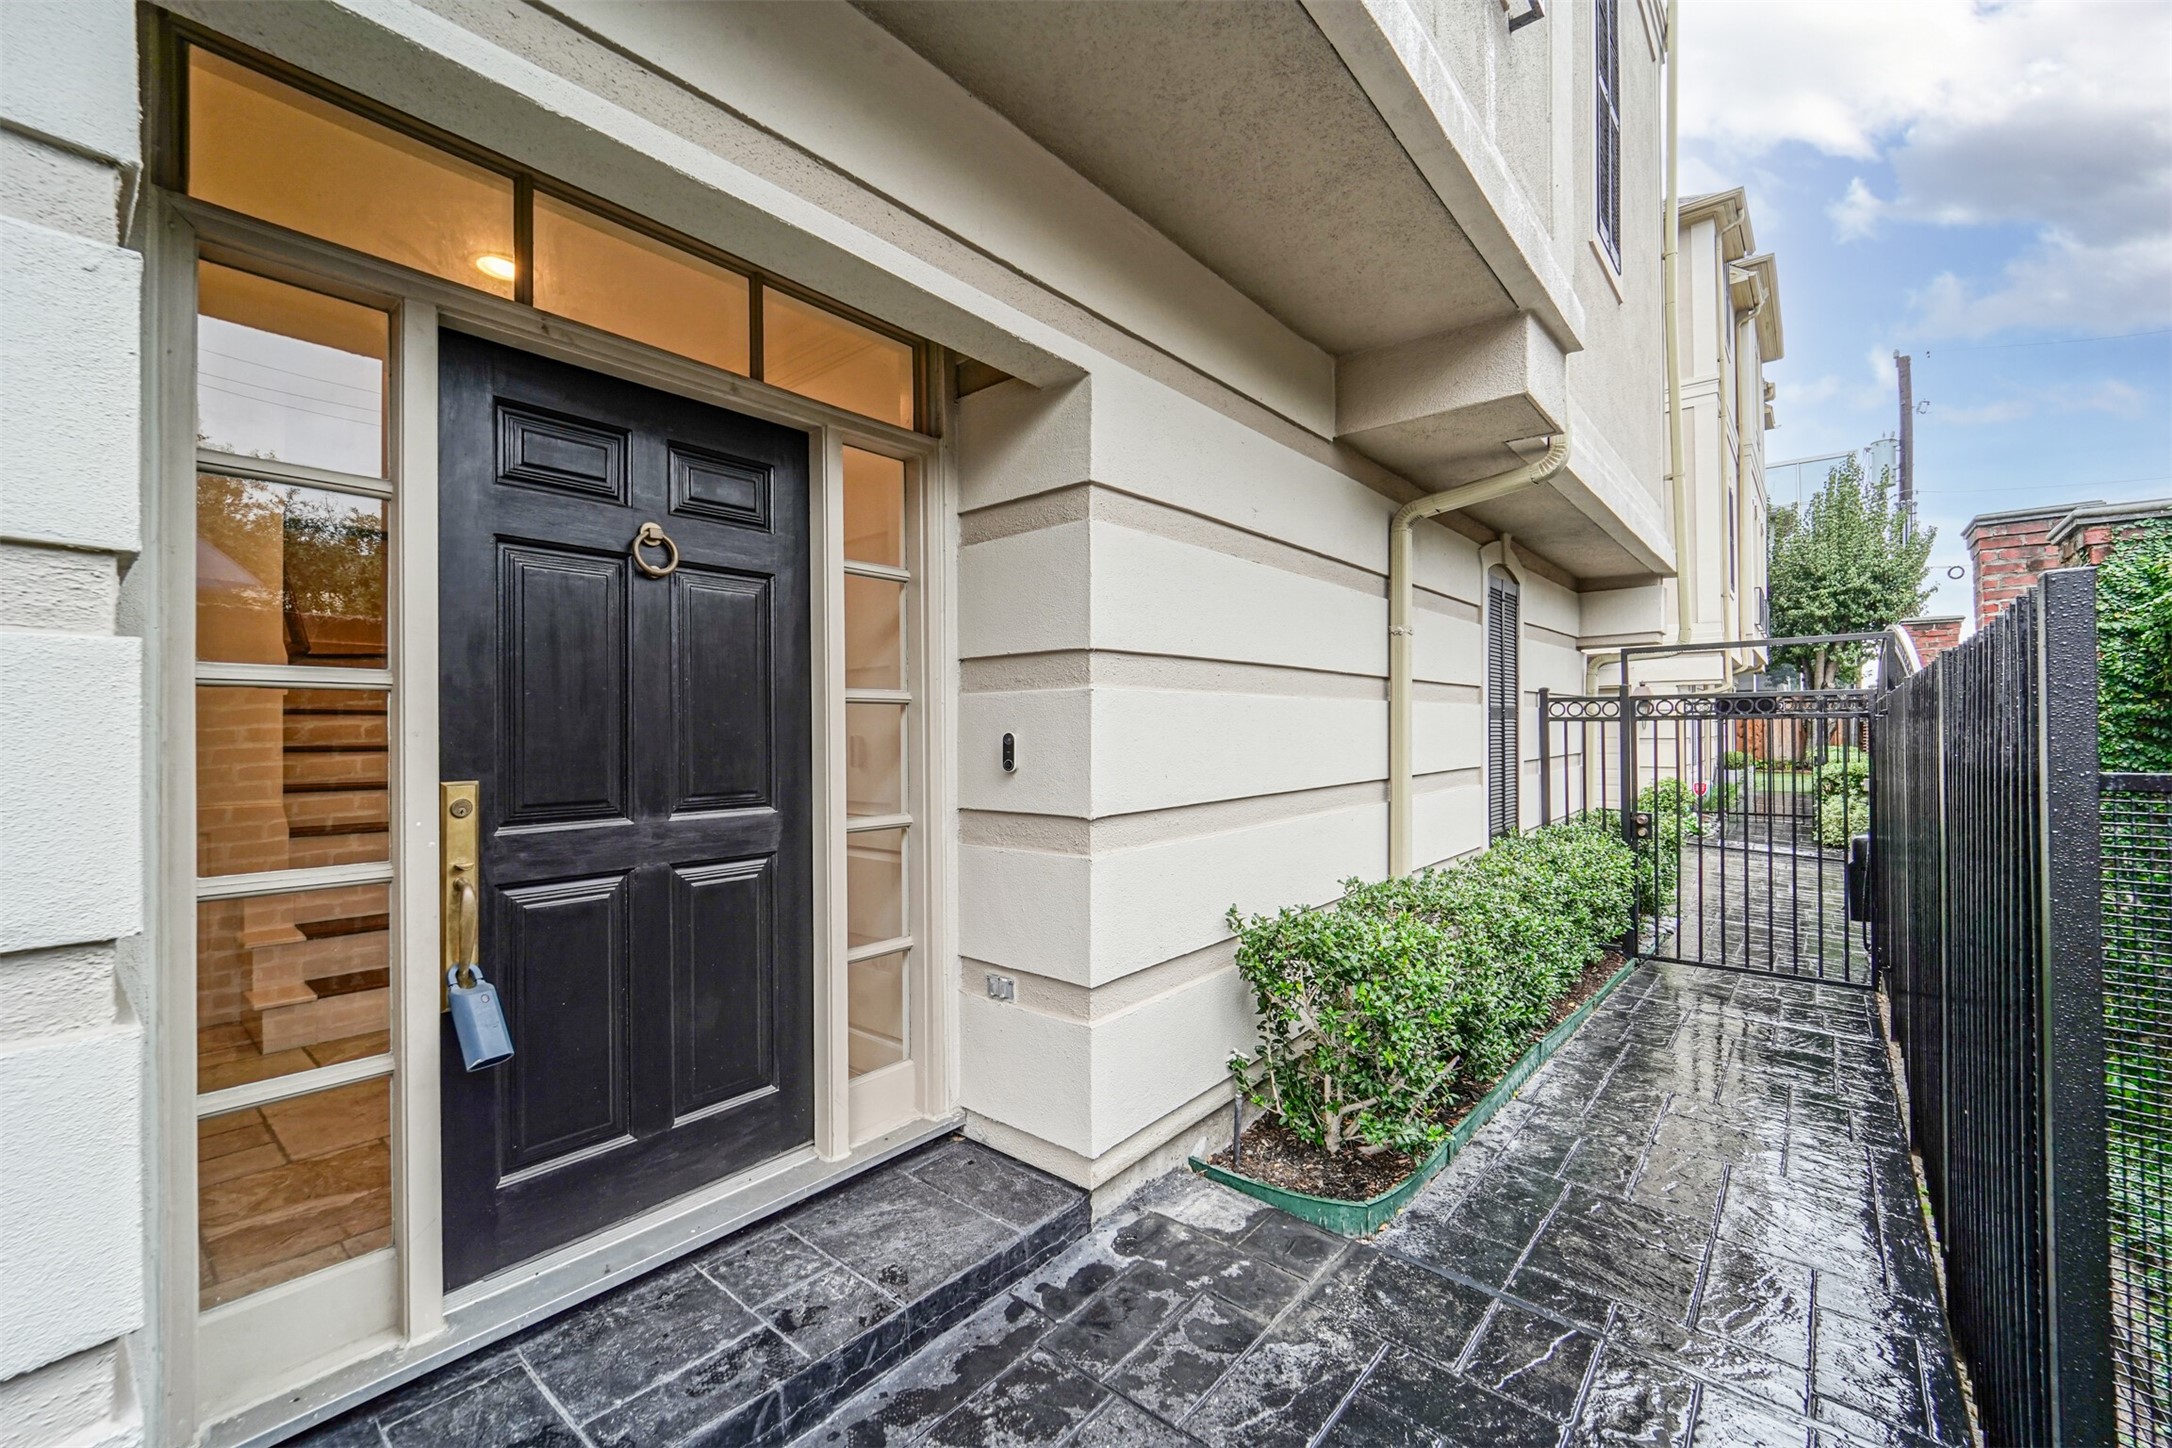 Ultimate privacy and security as you and guests enter through the side wrought iron gate to your beautiful home.